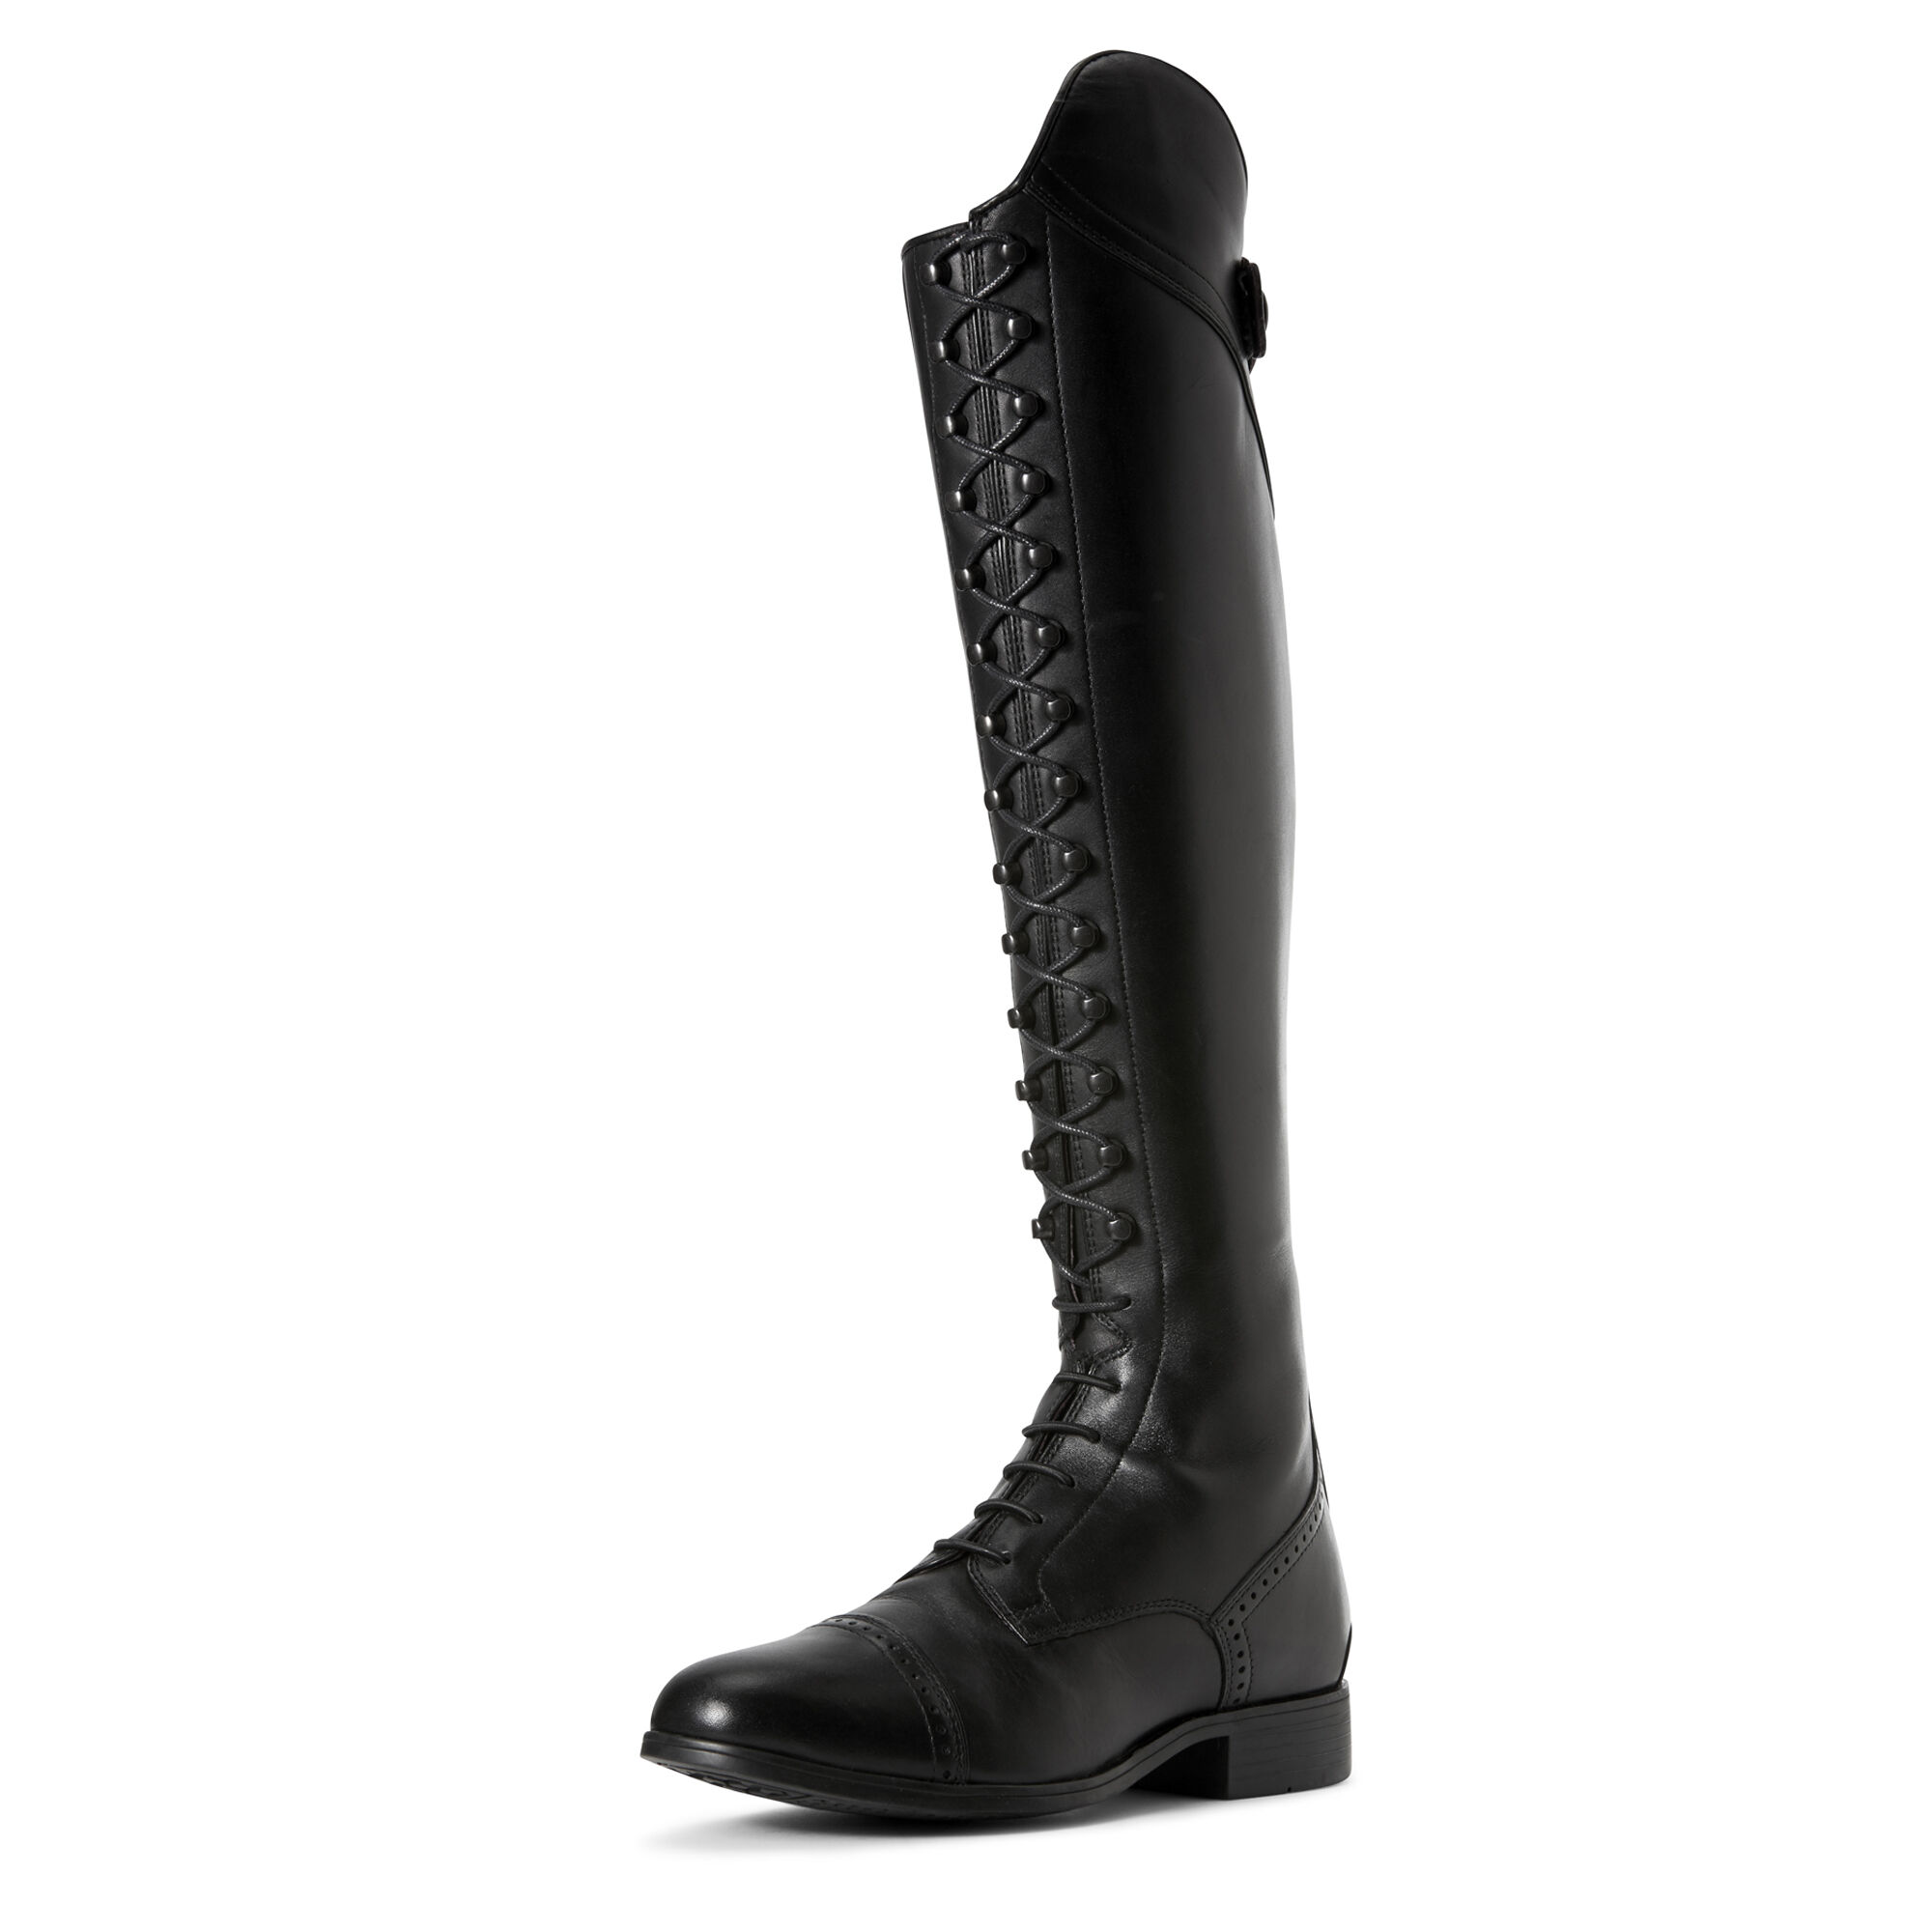 Women's Capriole Tall Riding Boots in Black Leather  Full by Ariat